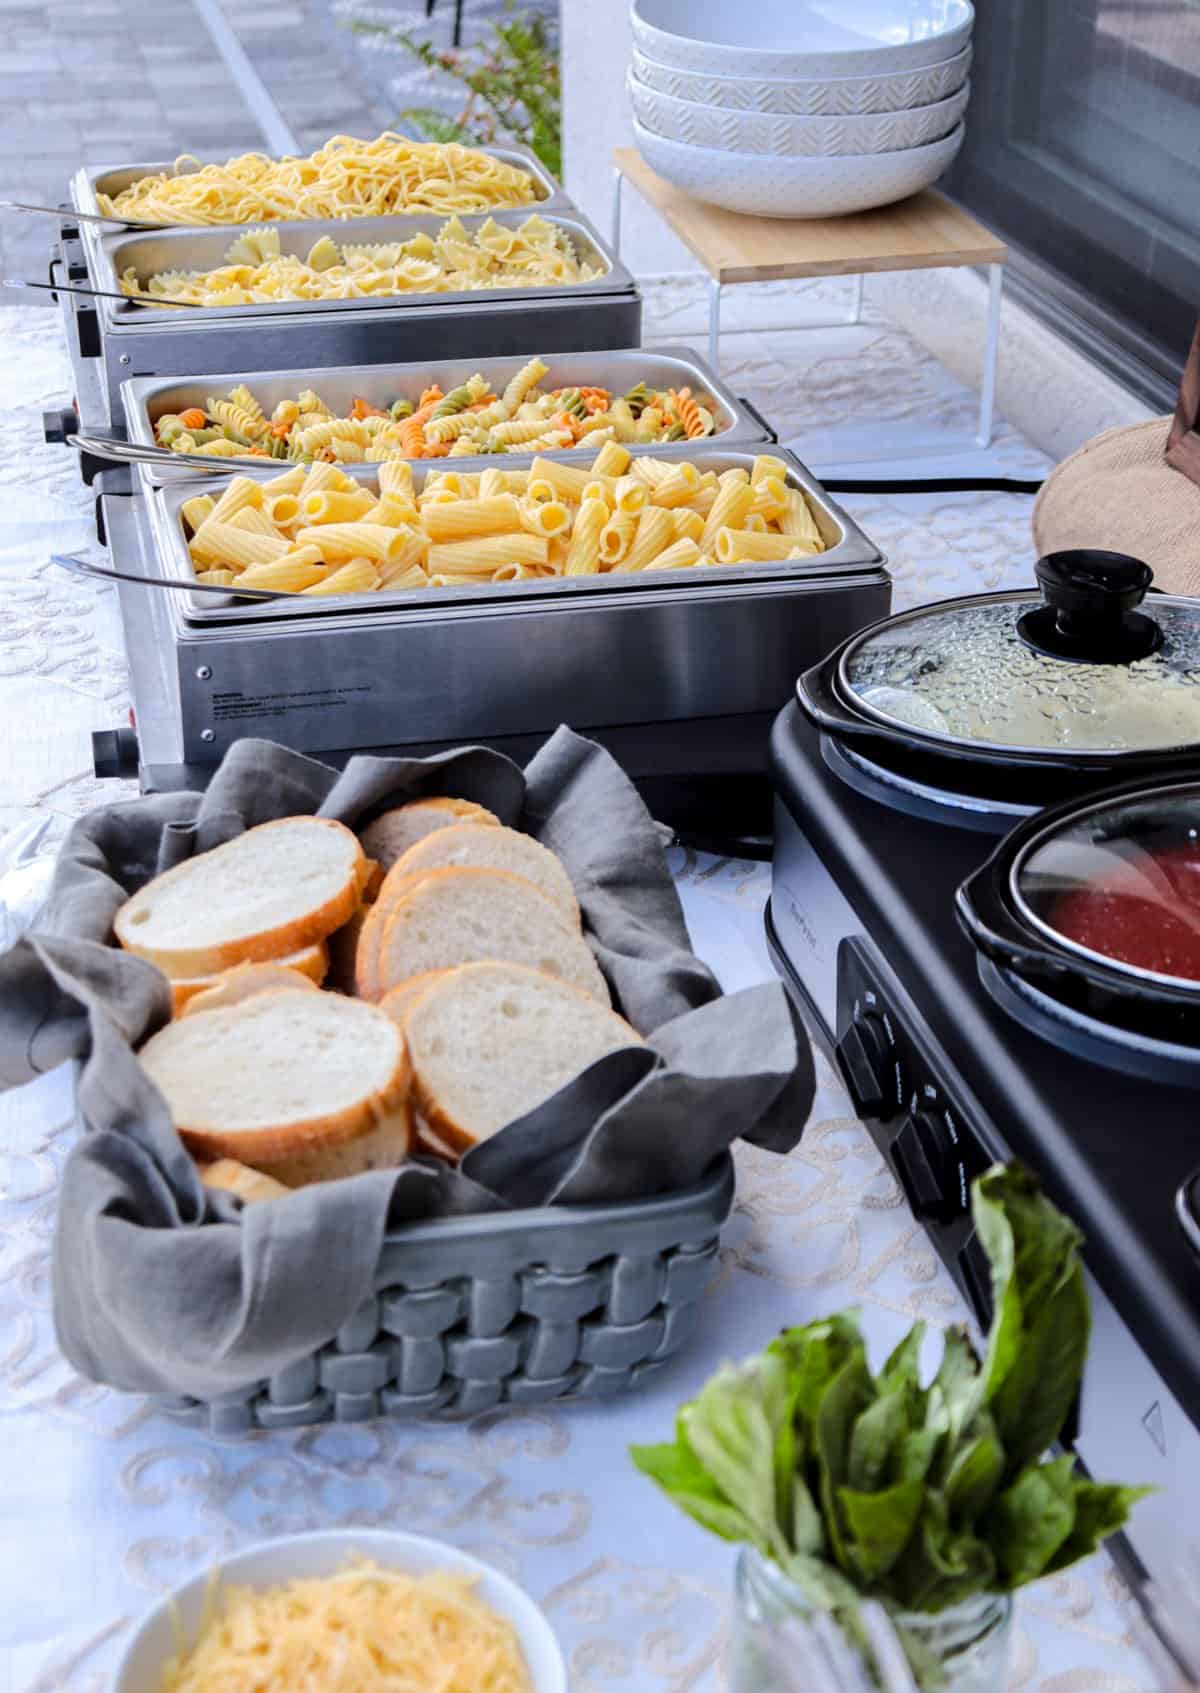 Pasta bar buffet table with pasta, bread and sauces.